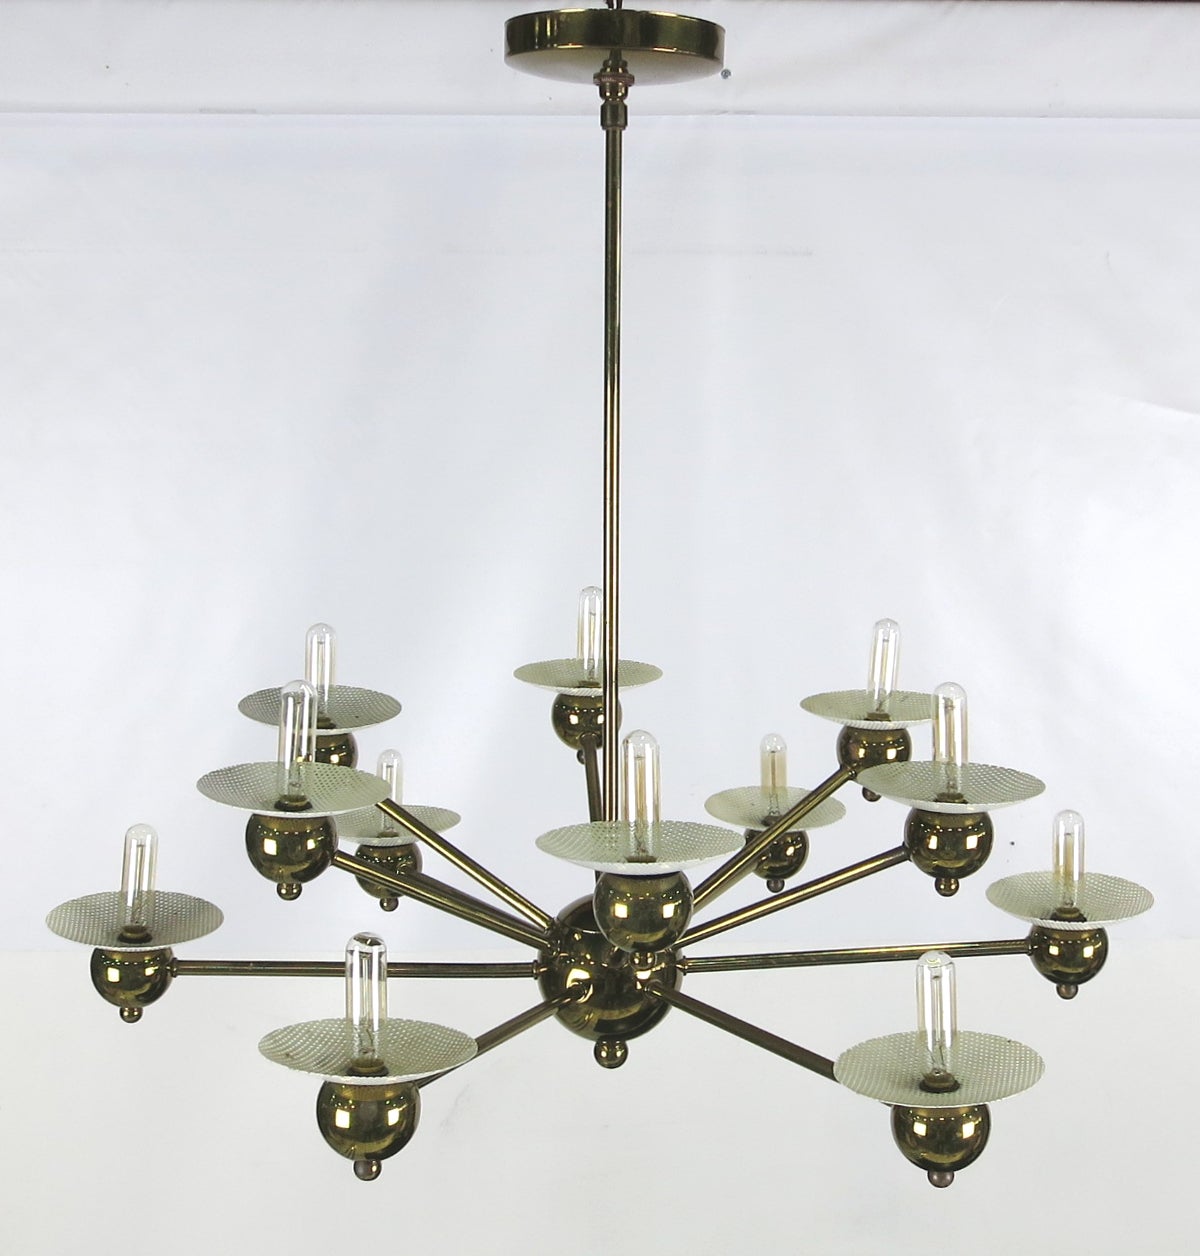 Dramatic Sputnik style brass chandelier with perforated metal 